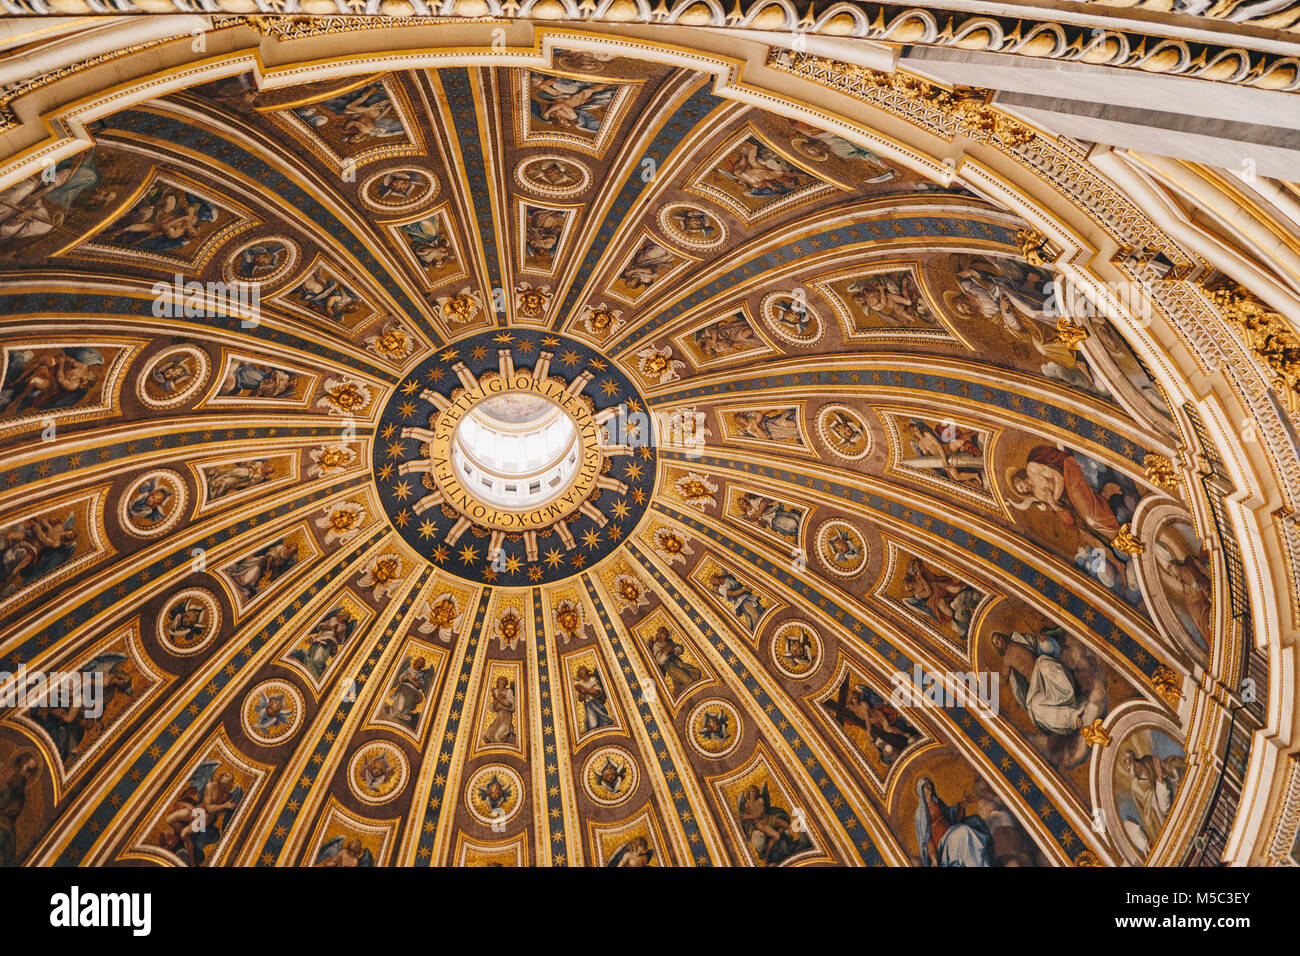 The dome of St. Peter's Basilica Cathedral in Rome, Vatican Stock Photo